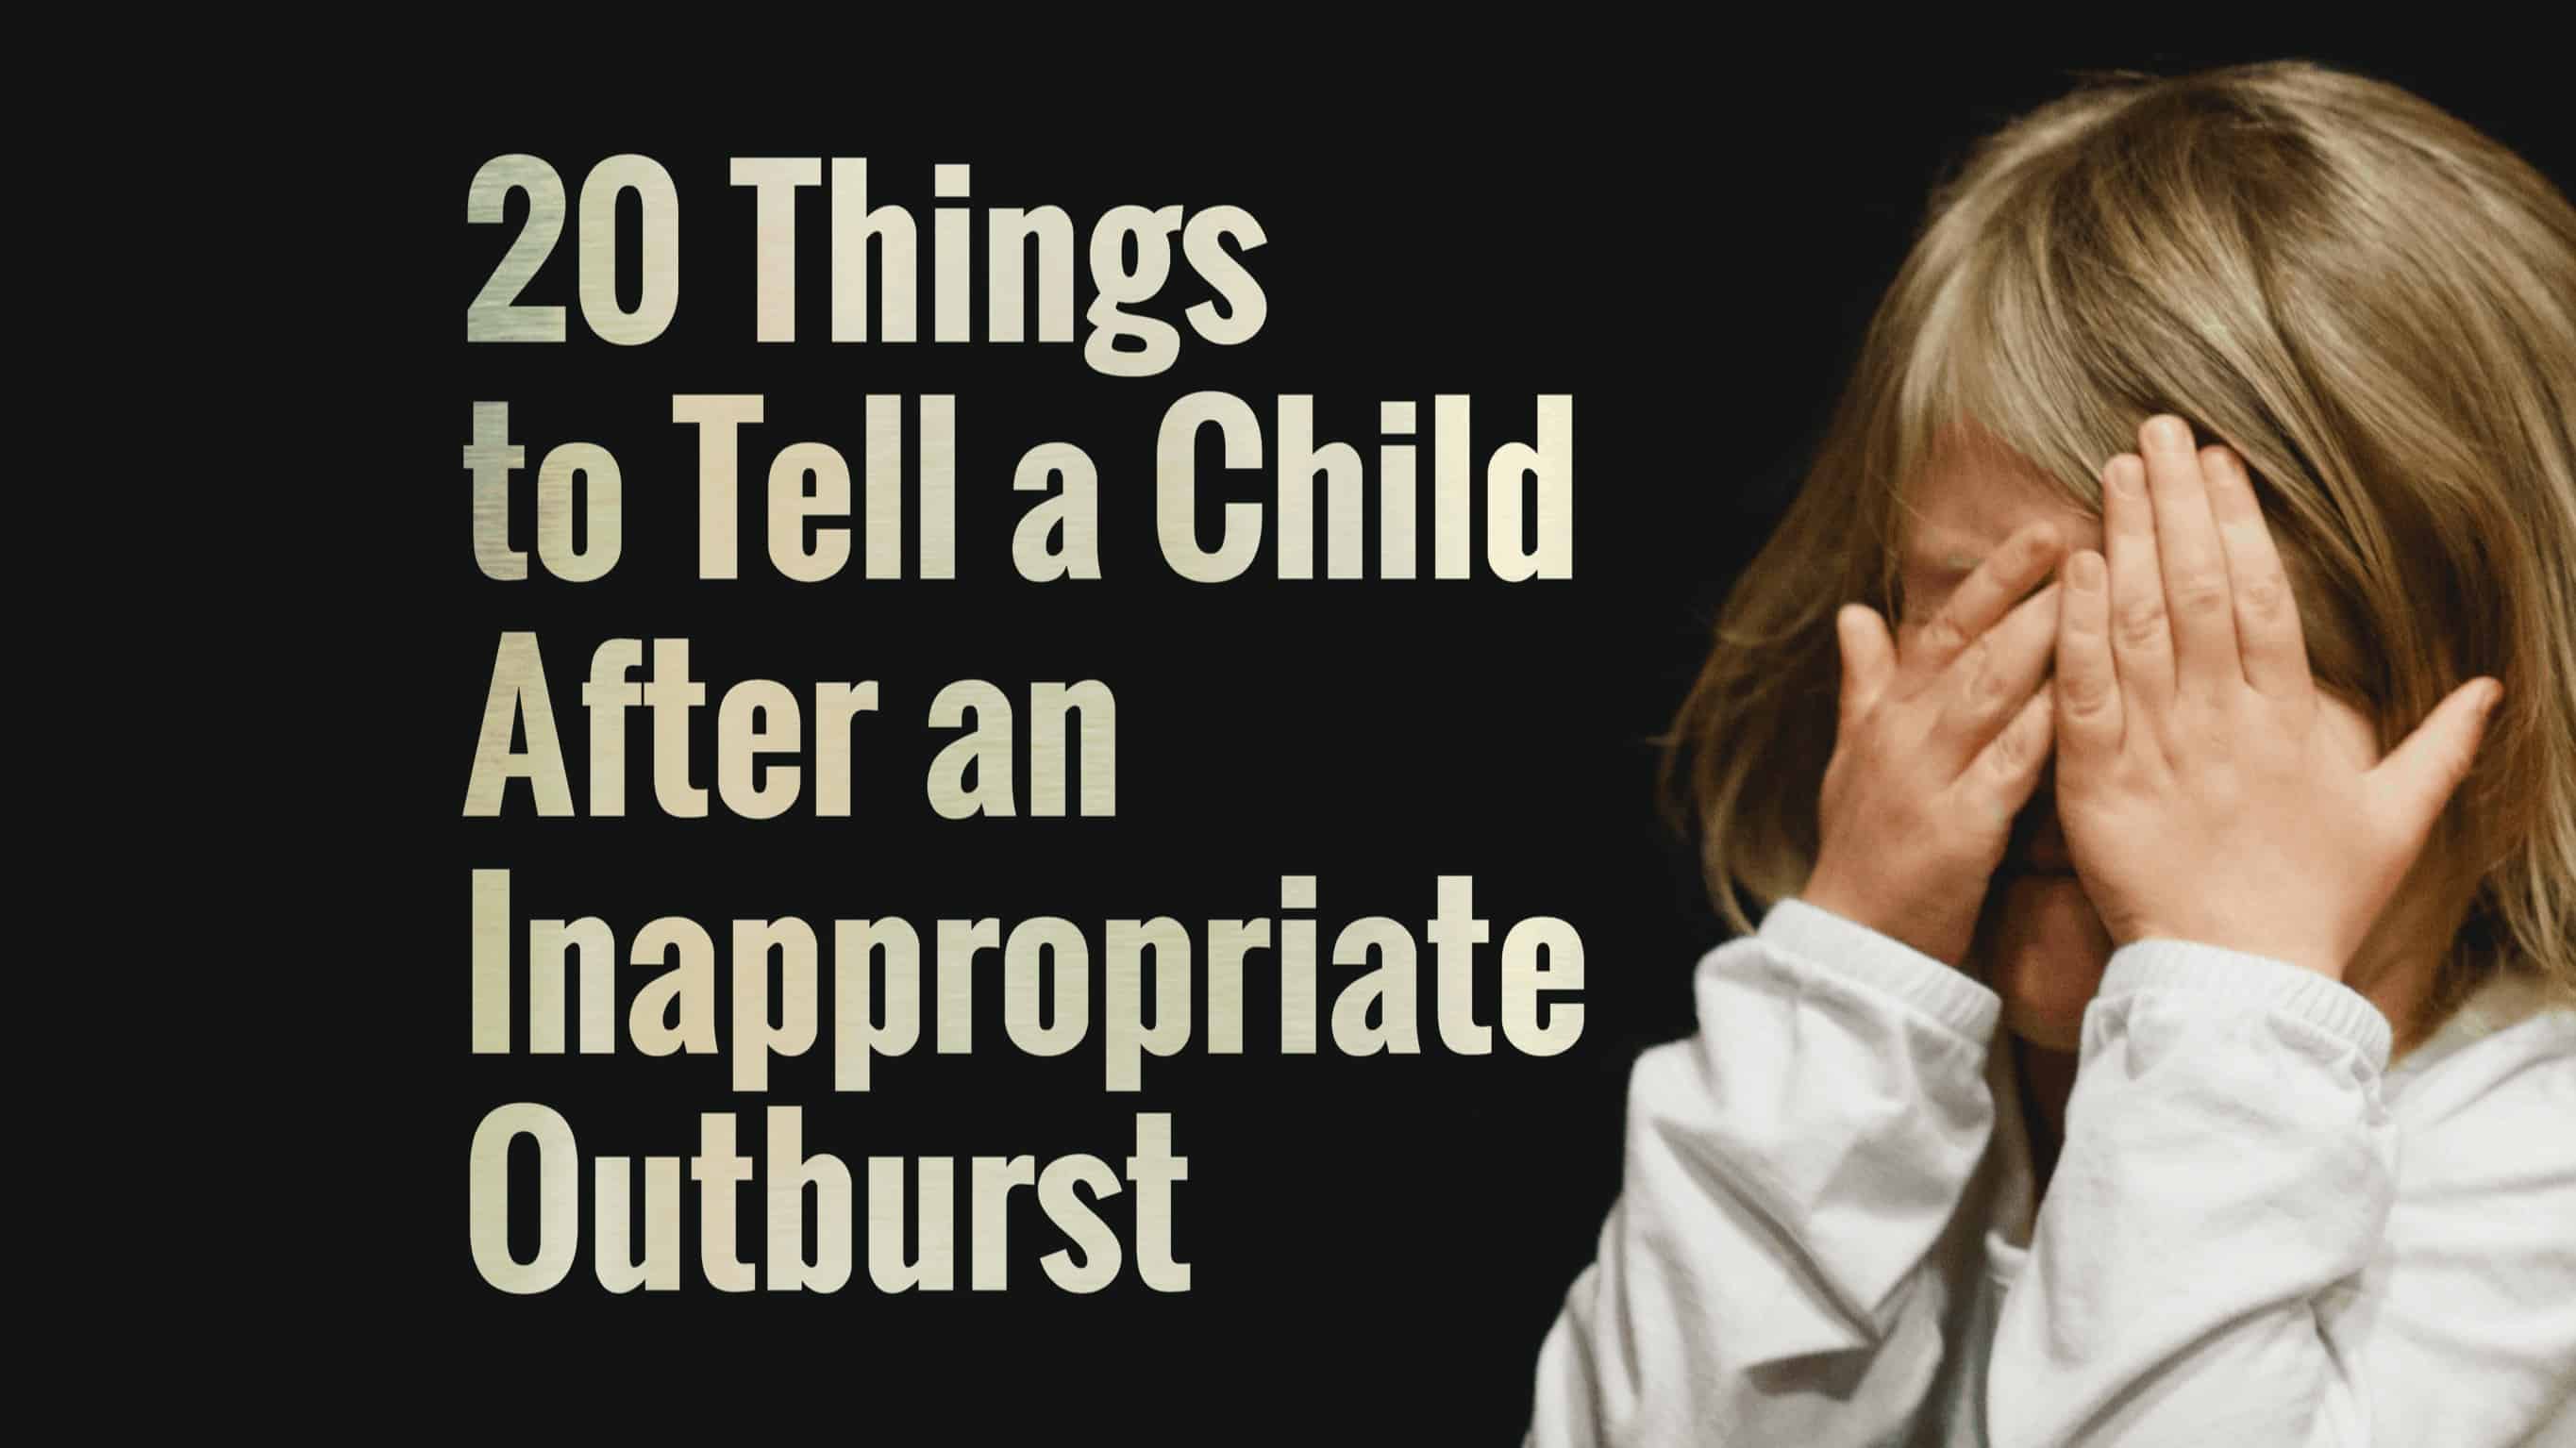 20 Things to Tell a Child After an Inappropriate Outburst